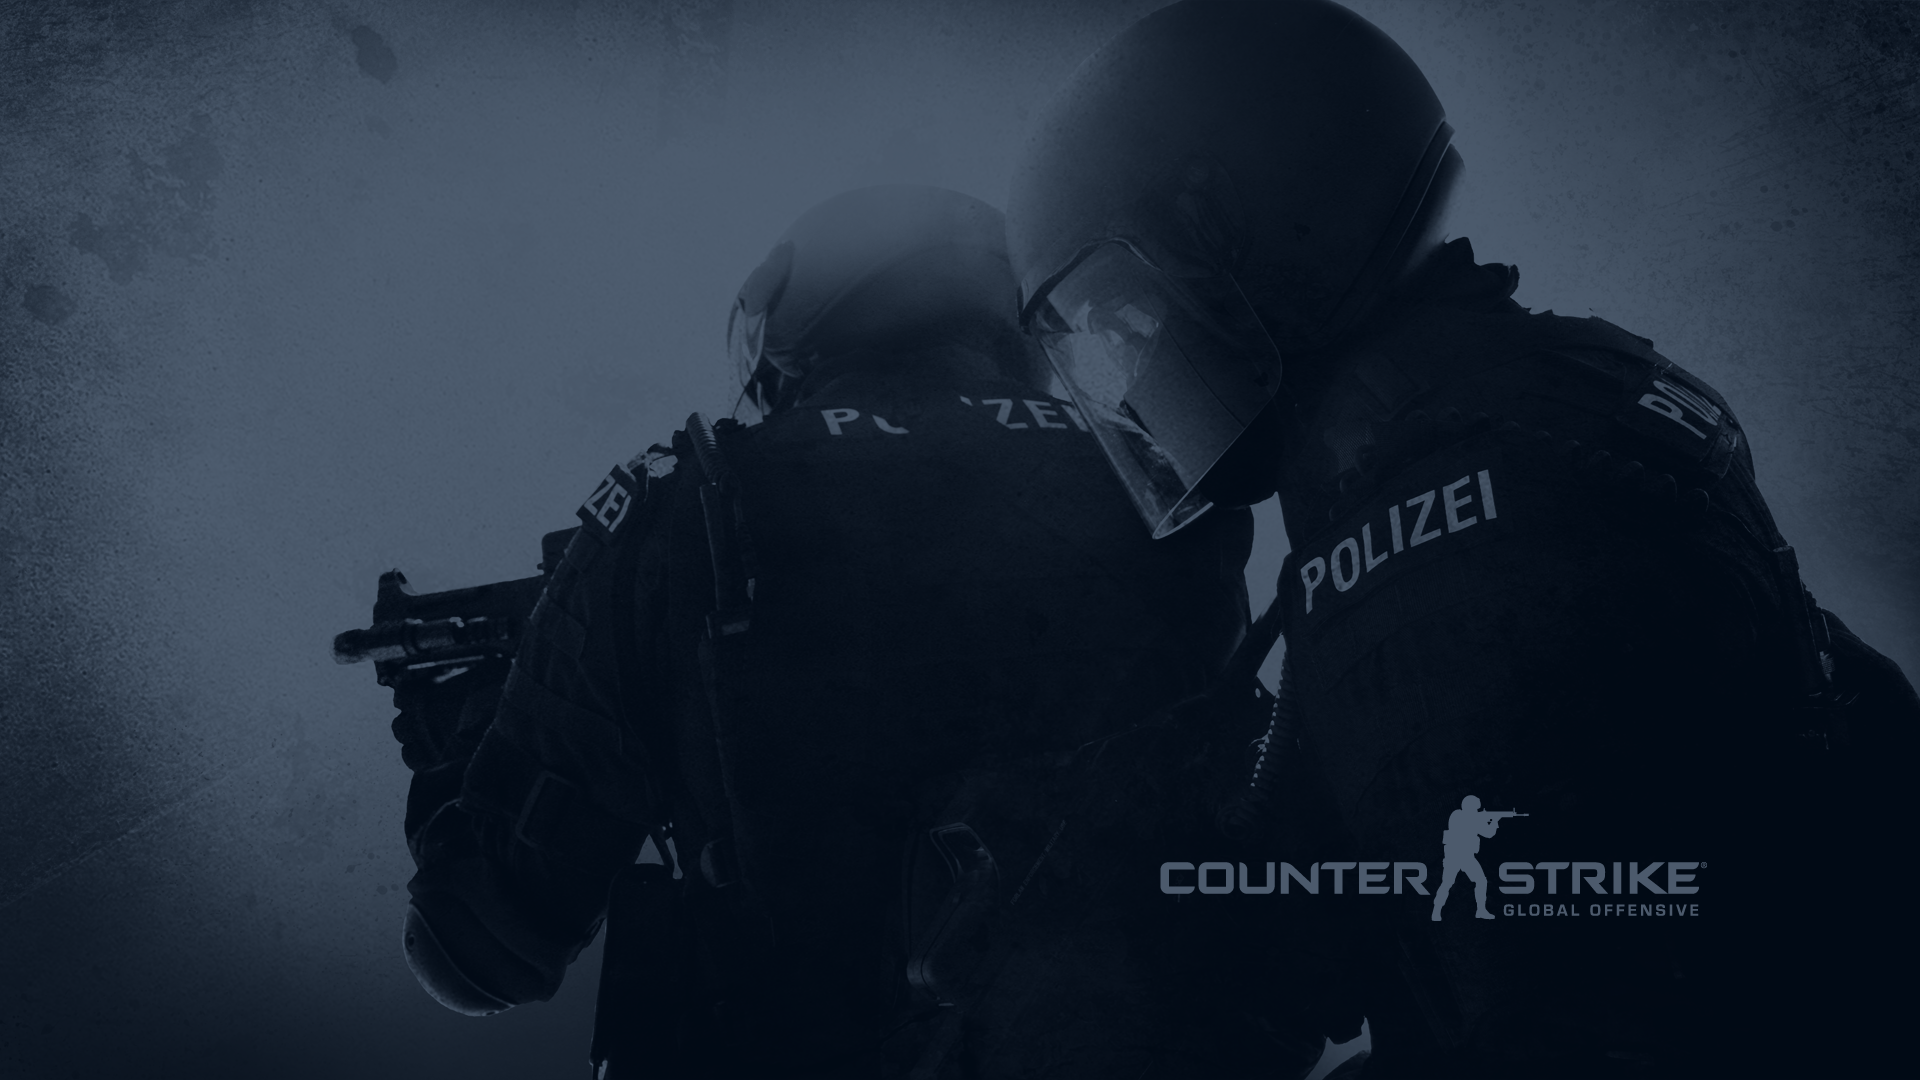 Gallery for - free wallpapers counter strike